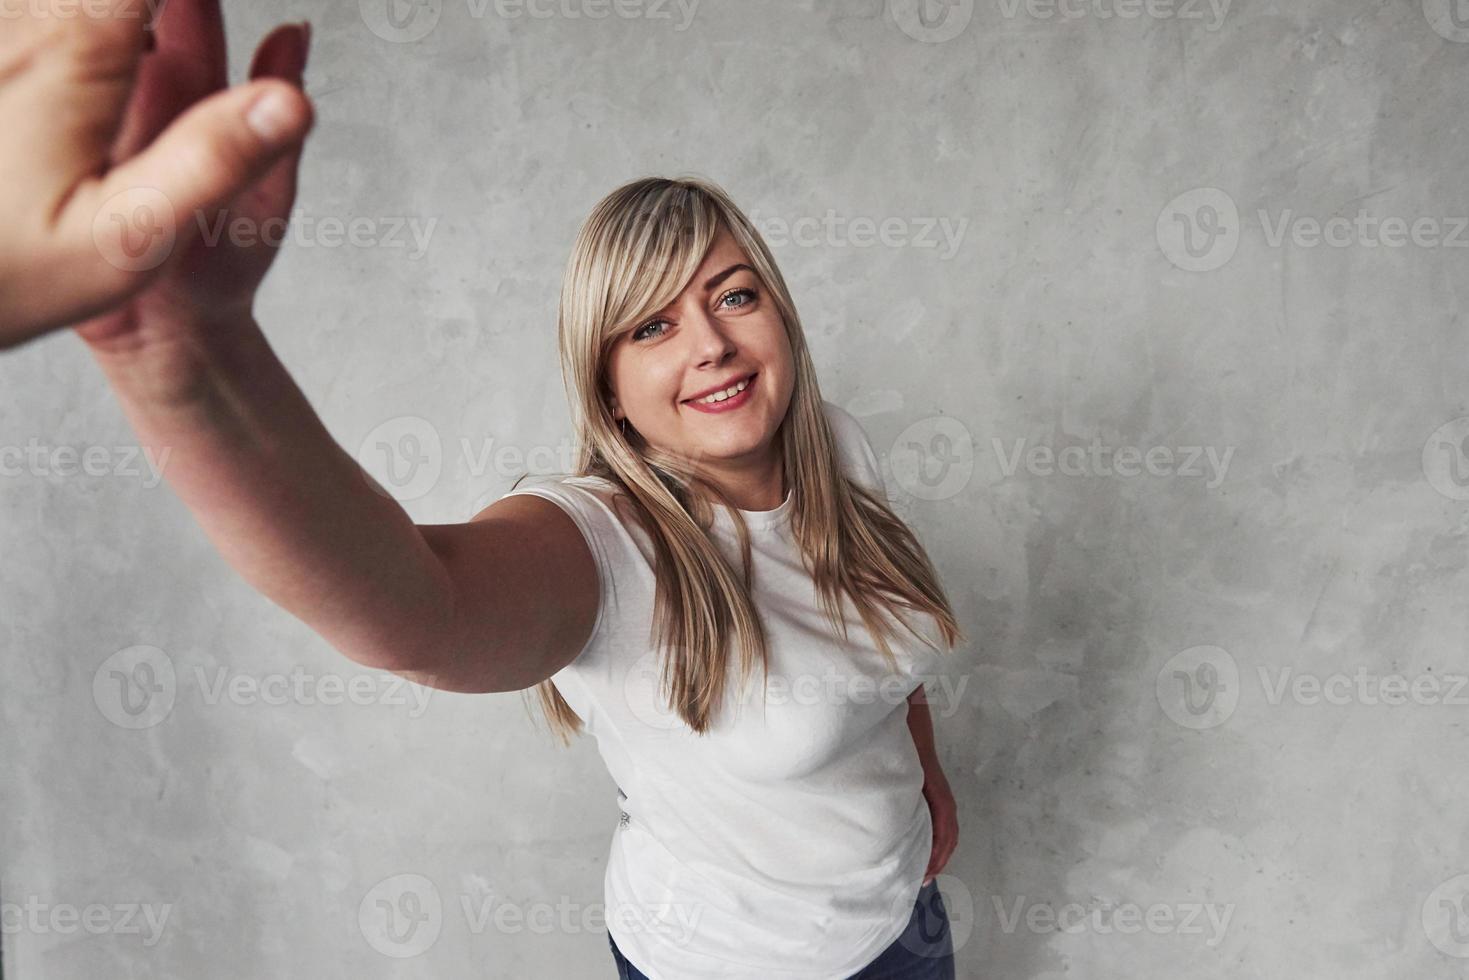 Greetings to you. Young white woman in the studio standing against grey background photo